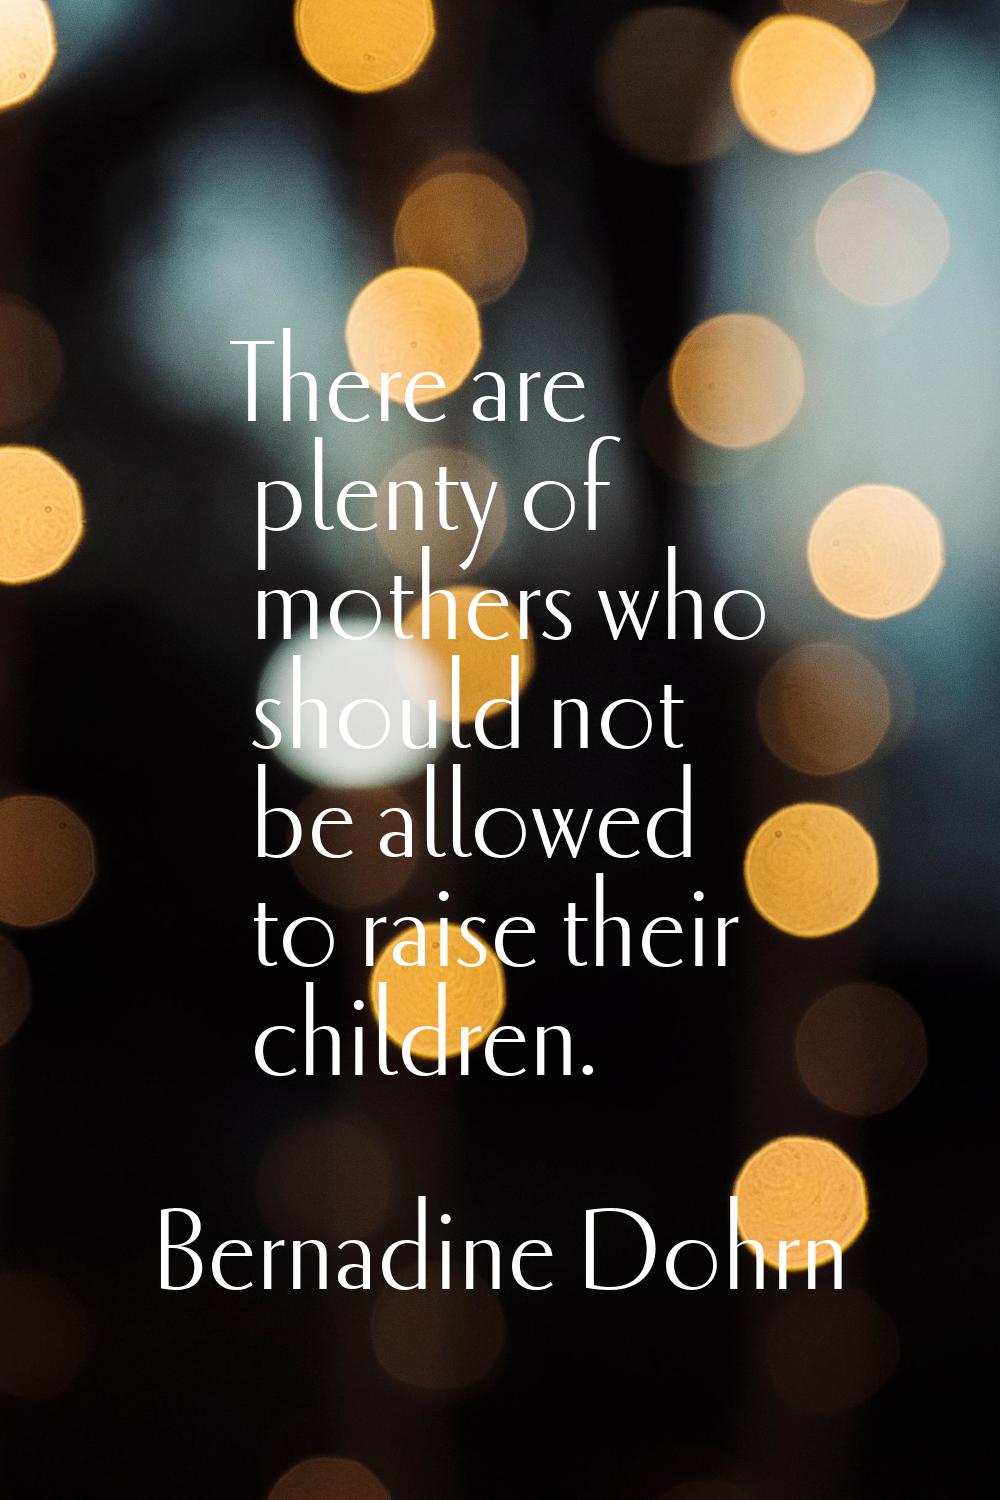 There are plenty of mothers who should not be allowed to raise their children.